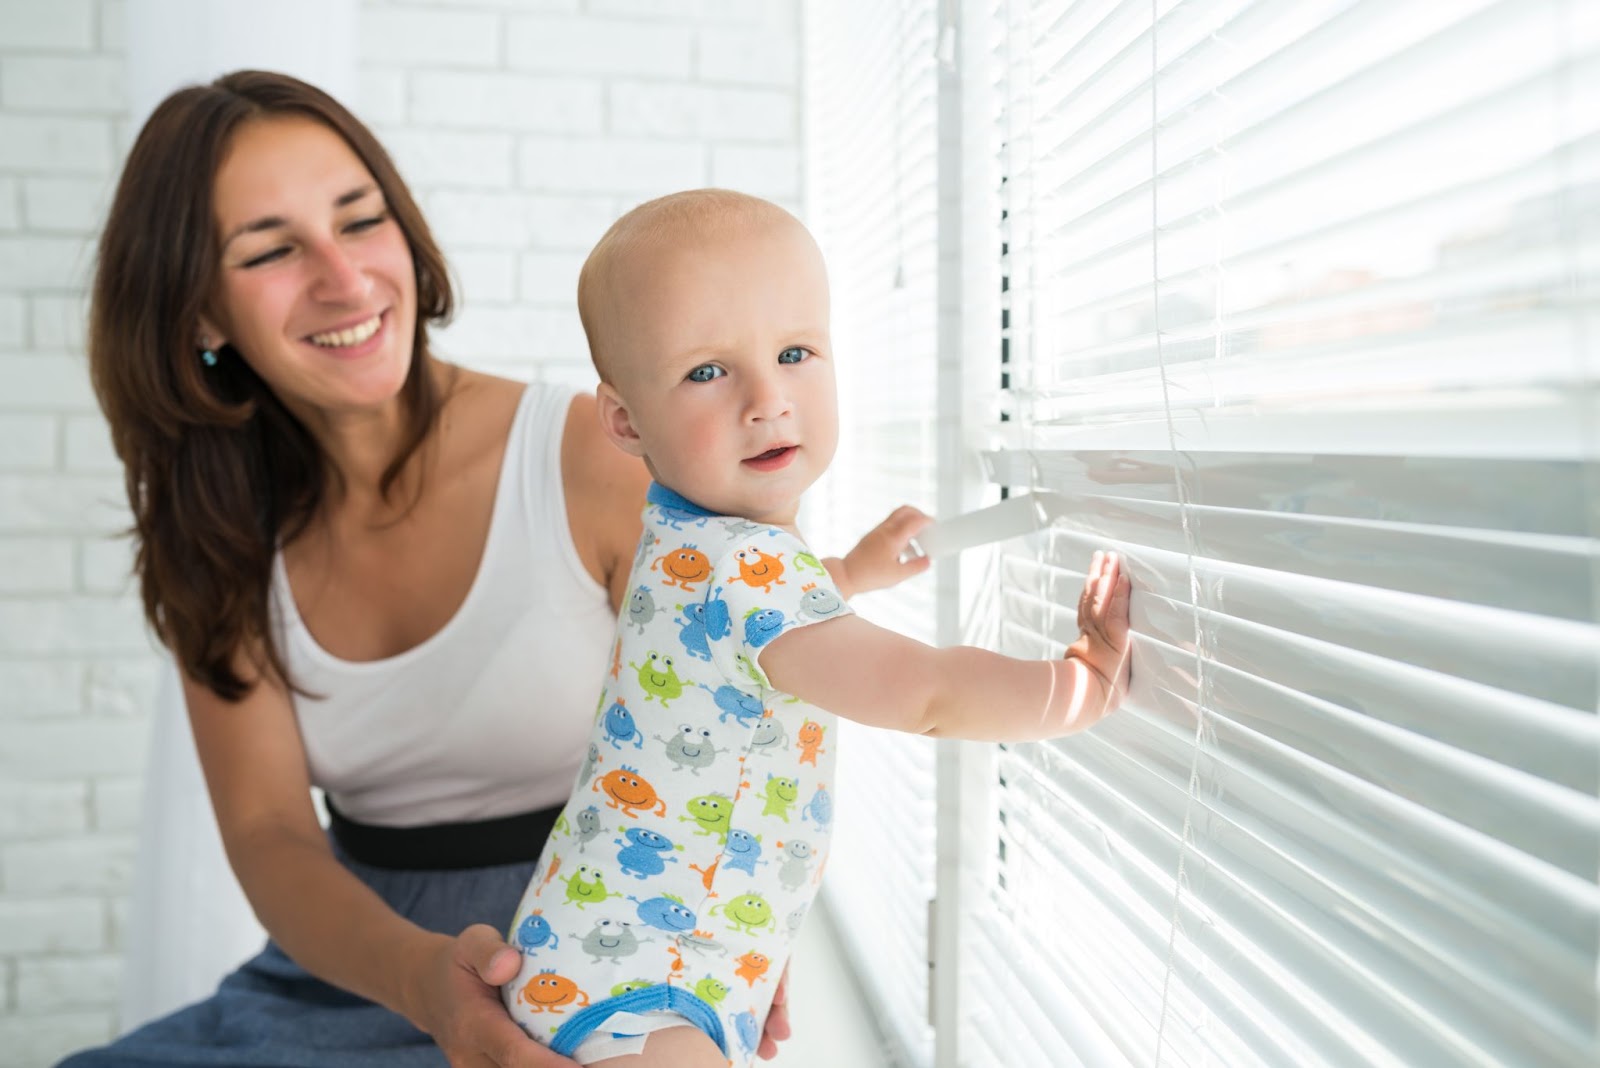 Mom looking at kid holding the child-safe window blinds looking at the camera